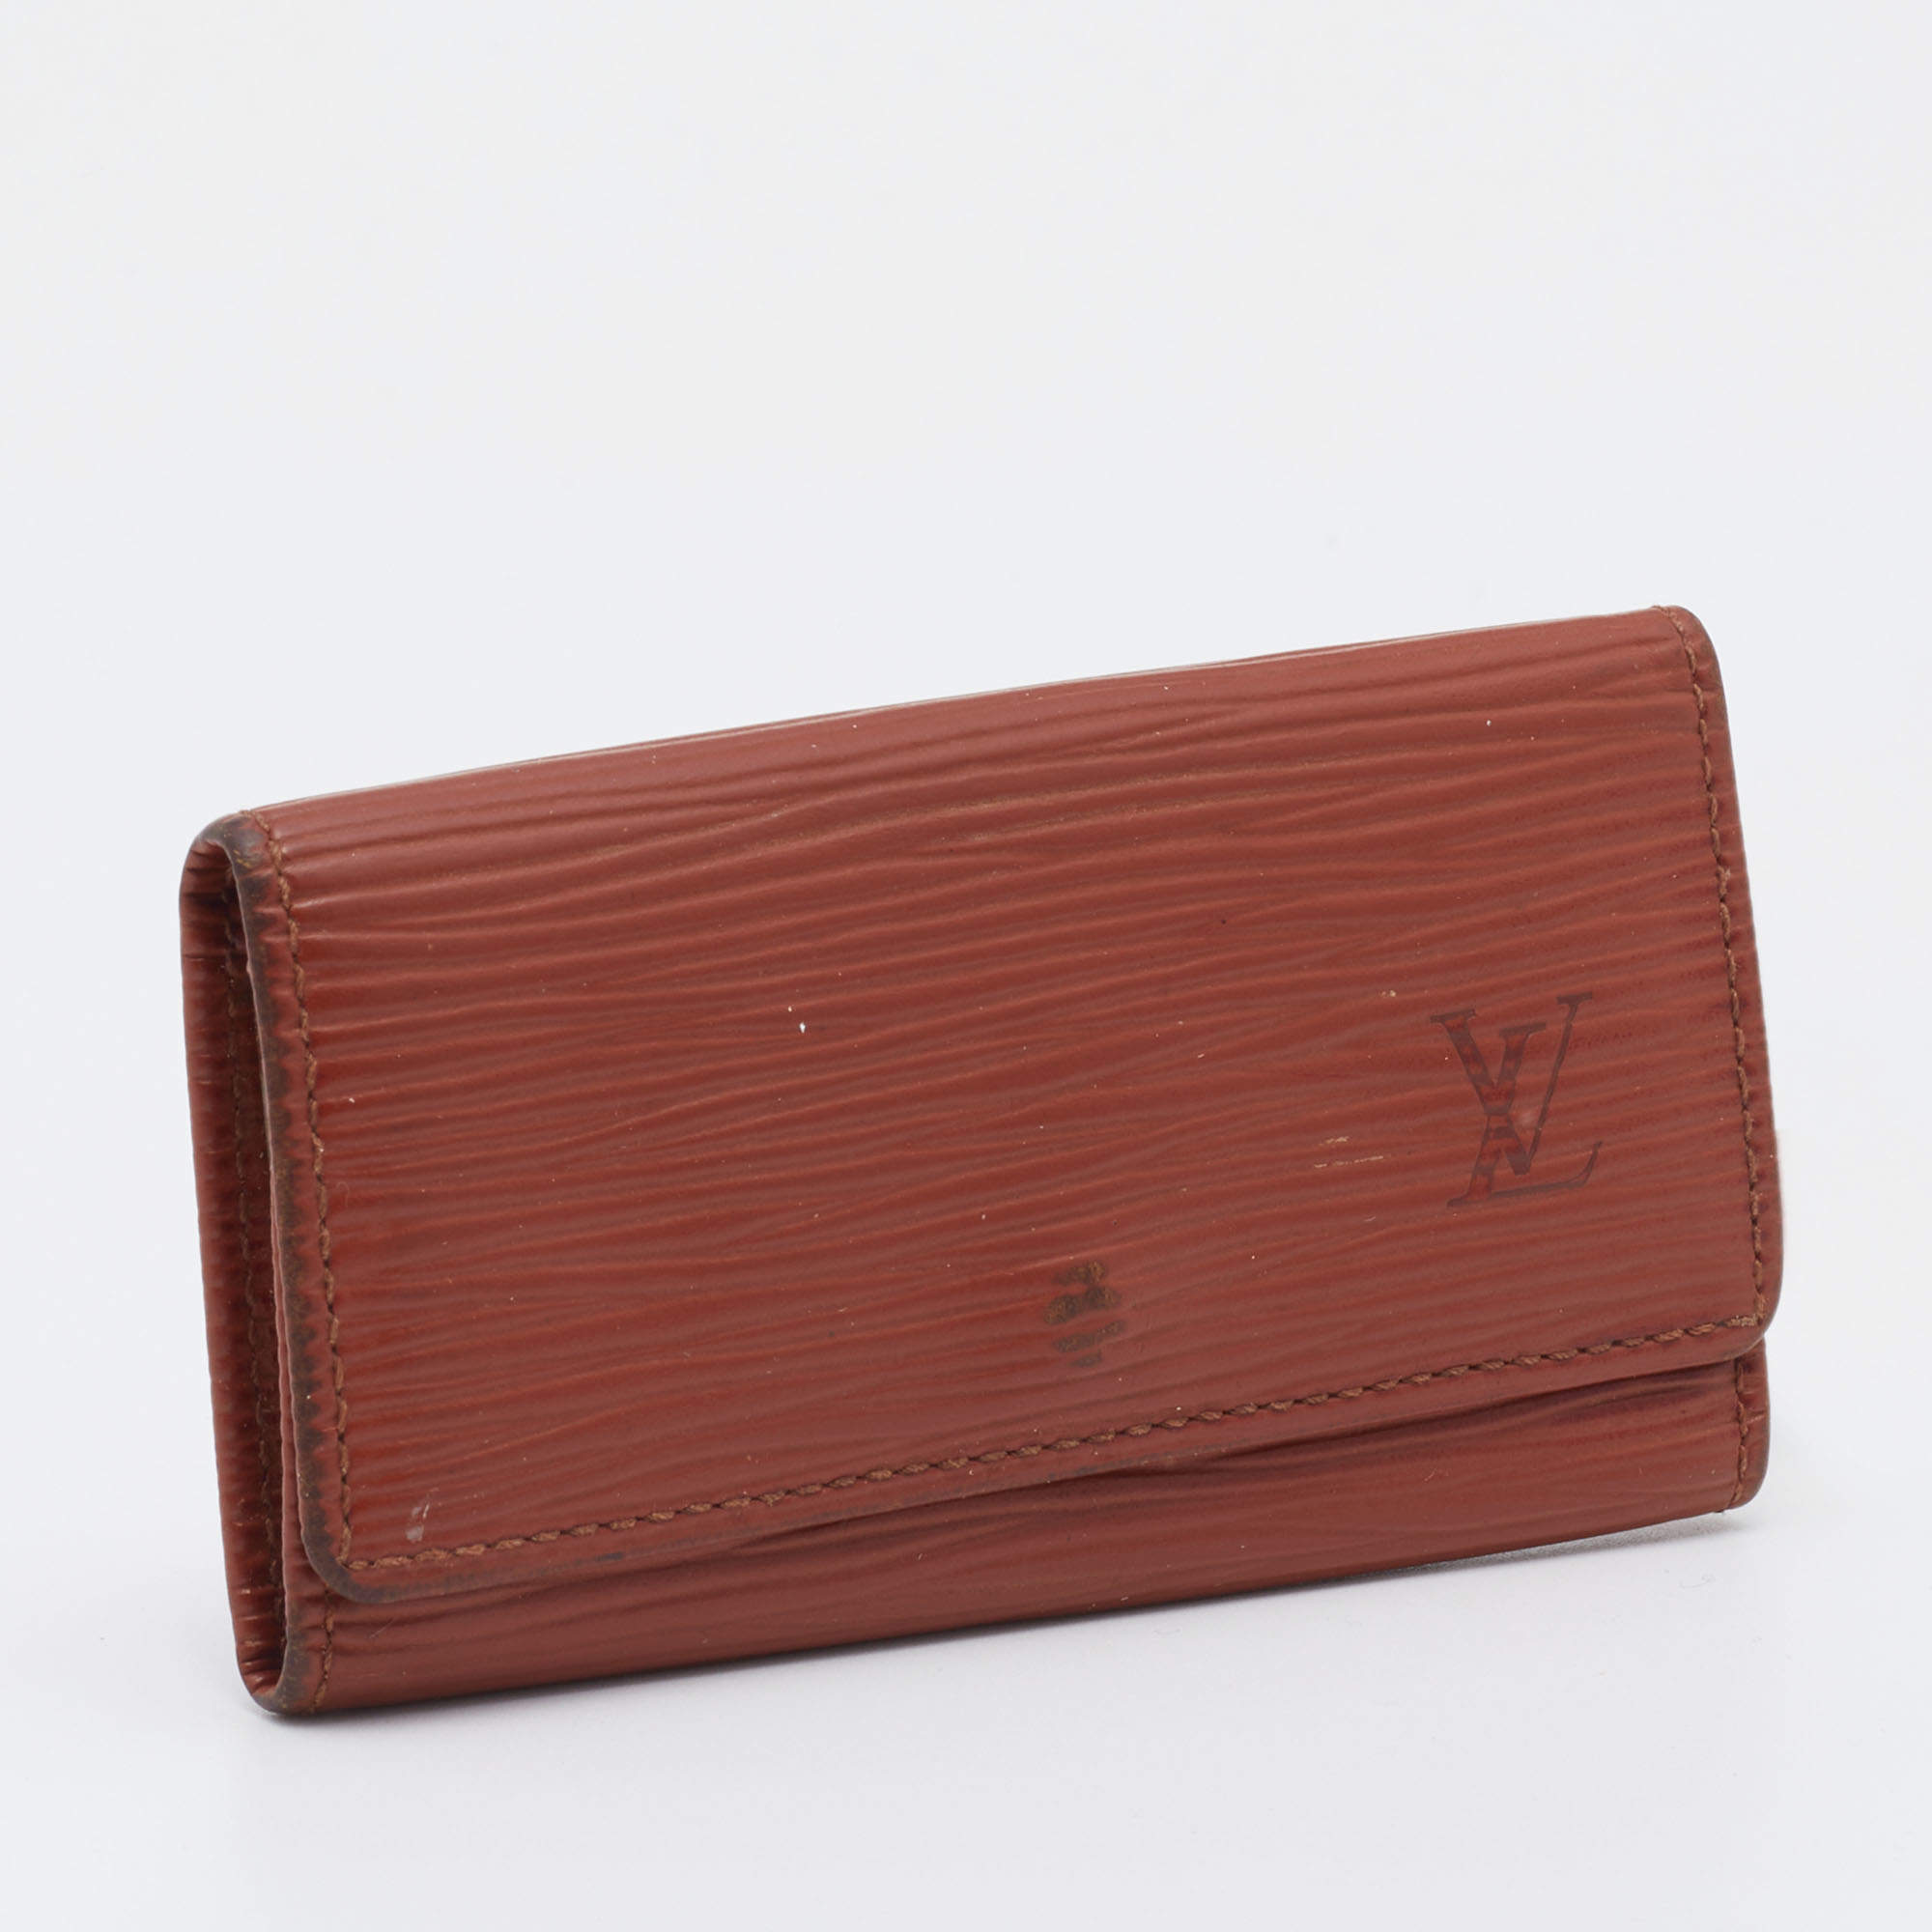 AUTHENTIC Louis Vuitton Red Epi Leather 4 Key Holder